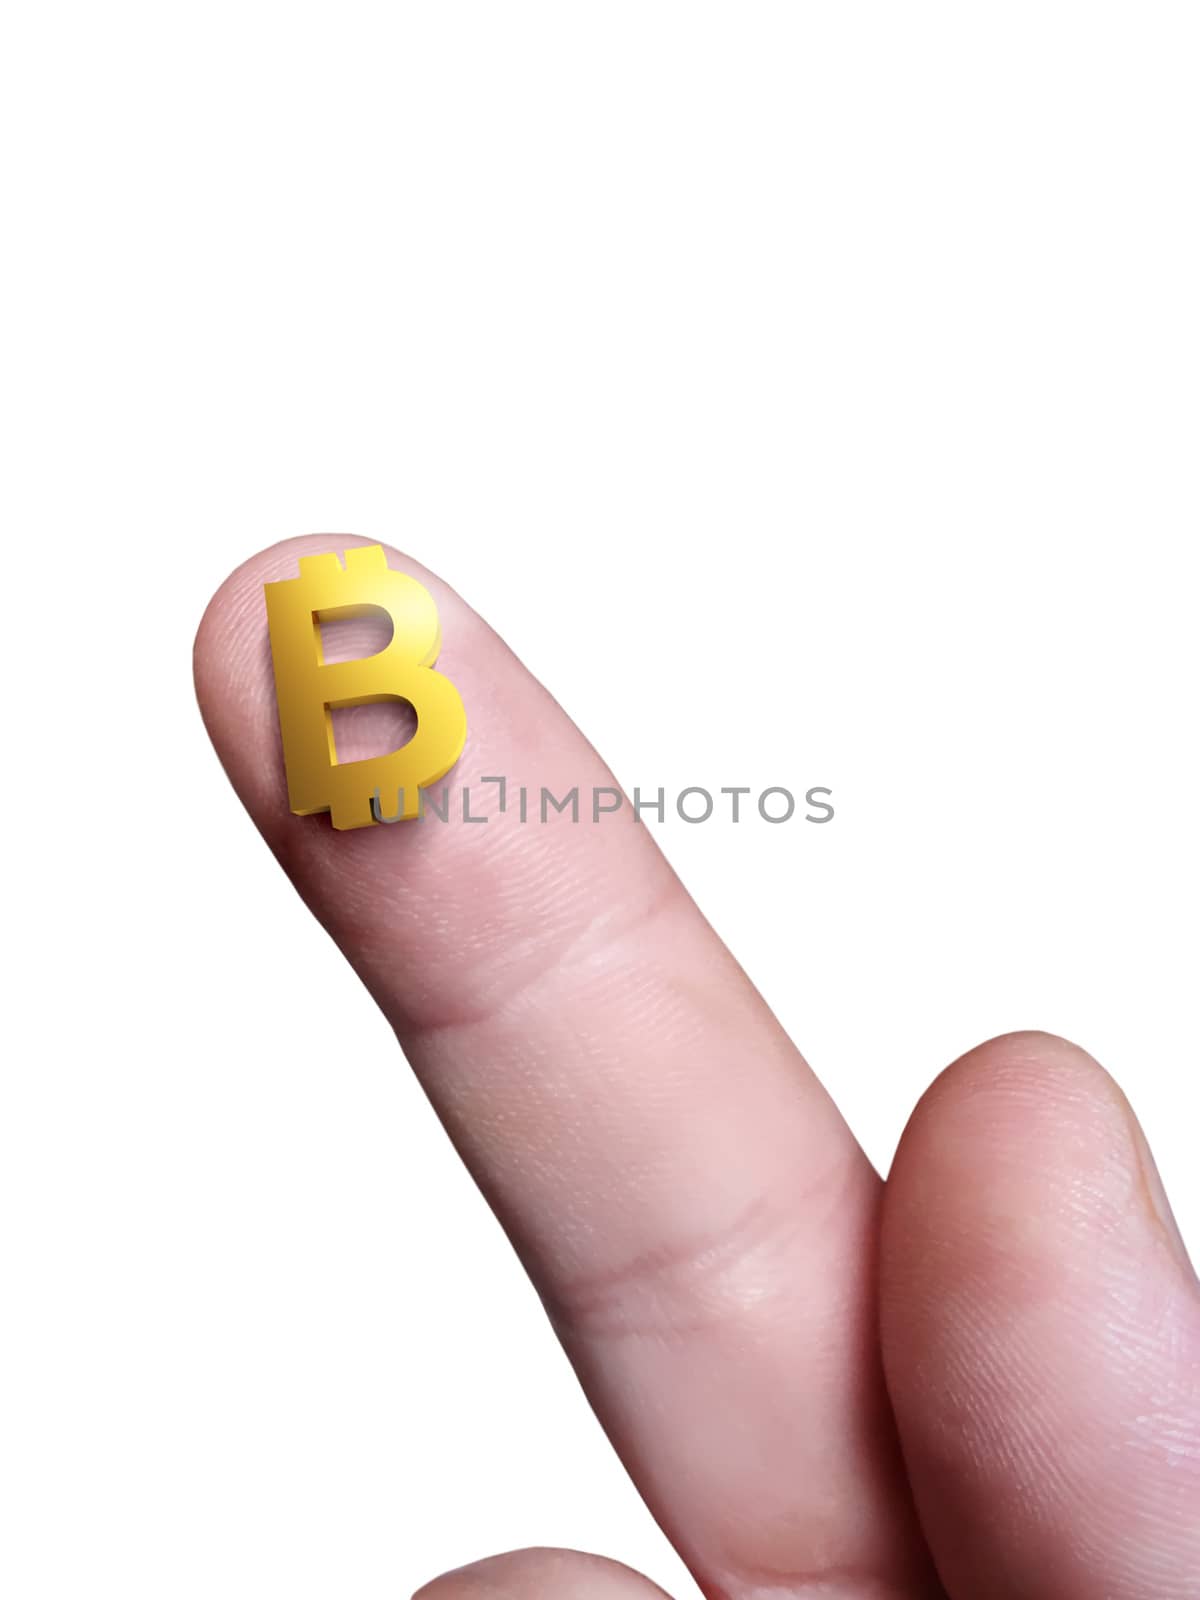 Micro sign Bitcoin electronic money on the finger and a white background